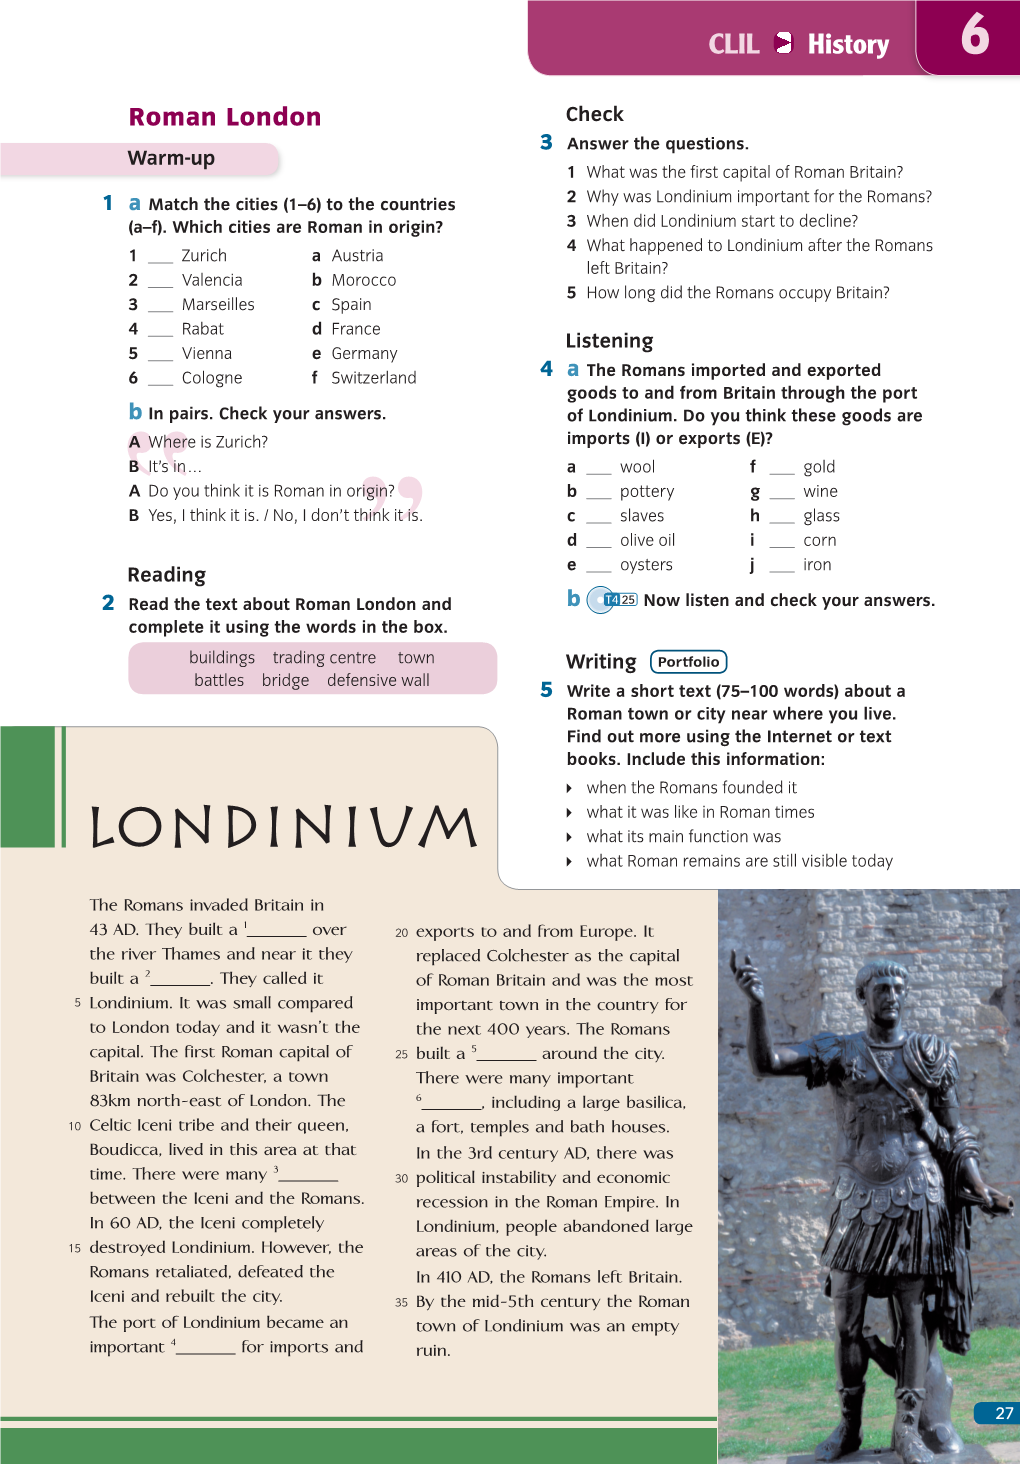 Londinium Important for the Romans? (A–F)